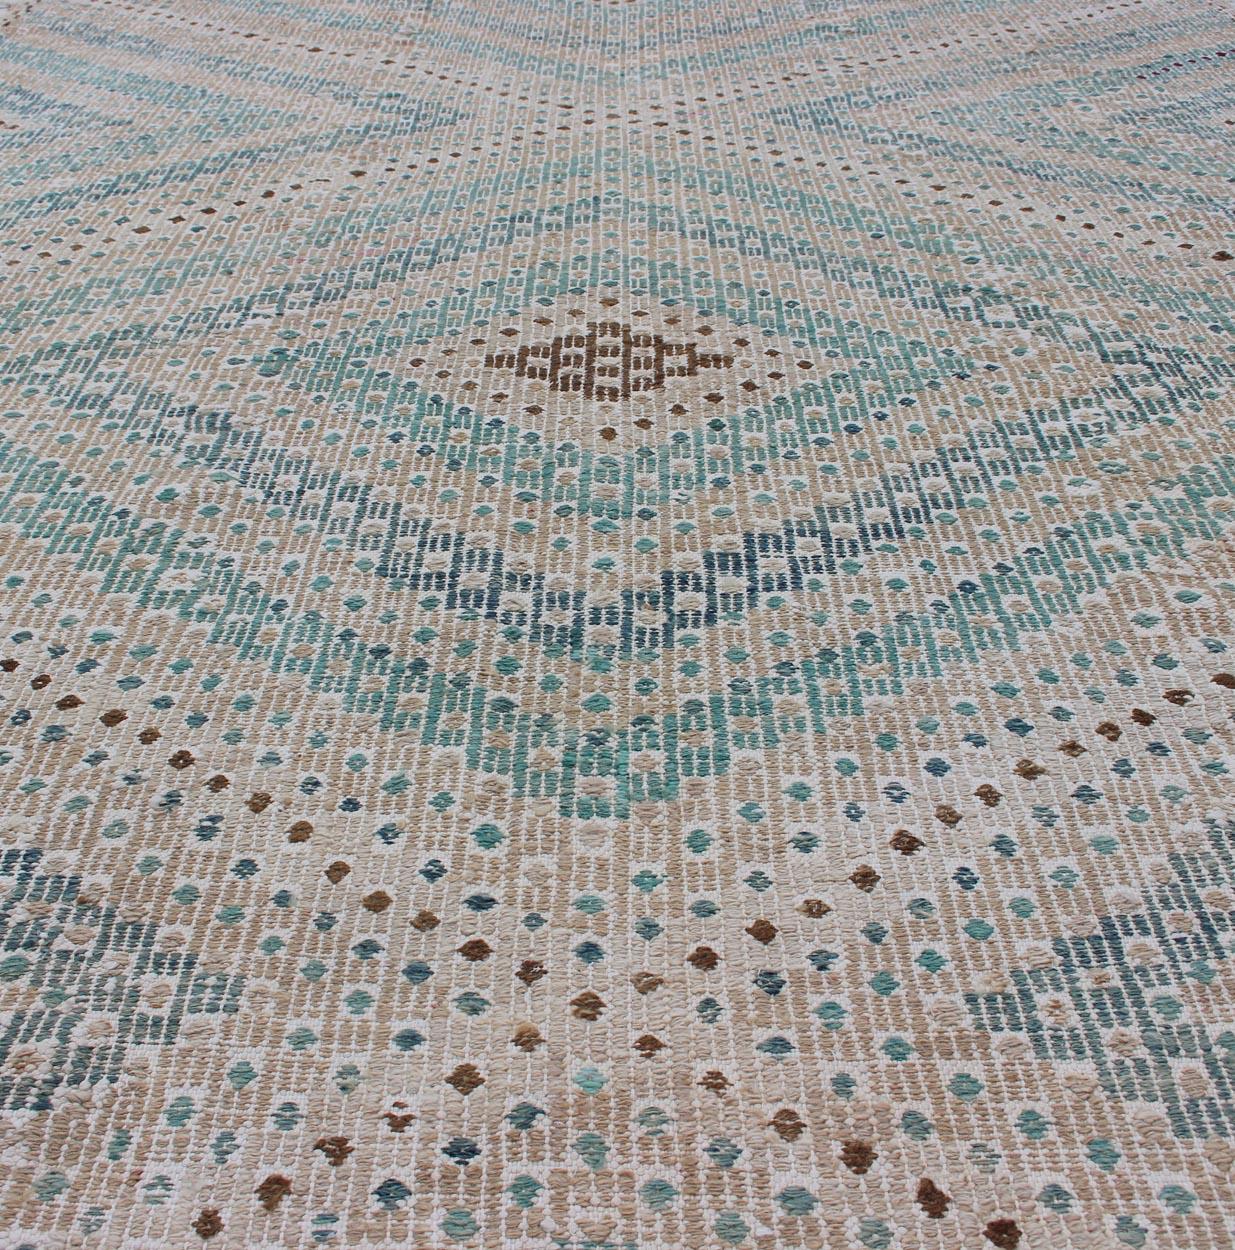 Hand-Woven Diamond Design Vintage Turkish Embroidered Kilim in Tan, Blue, and Light Green For Sale